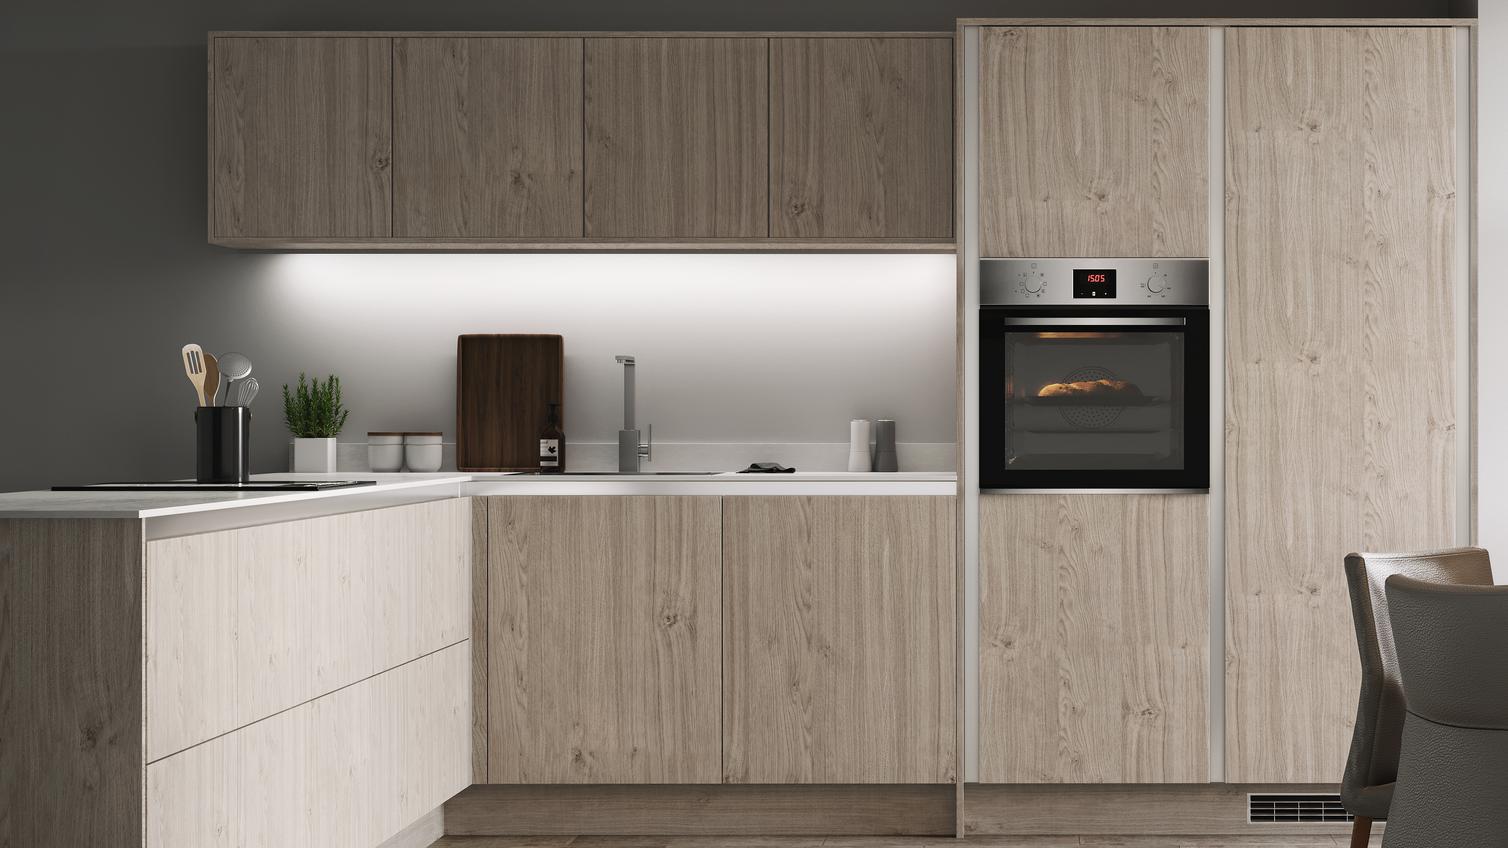 Light grey oak handleless kitchen in an l shape with wall cabinets along a single wall, white worktop and built in oven.